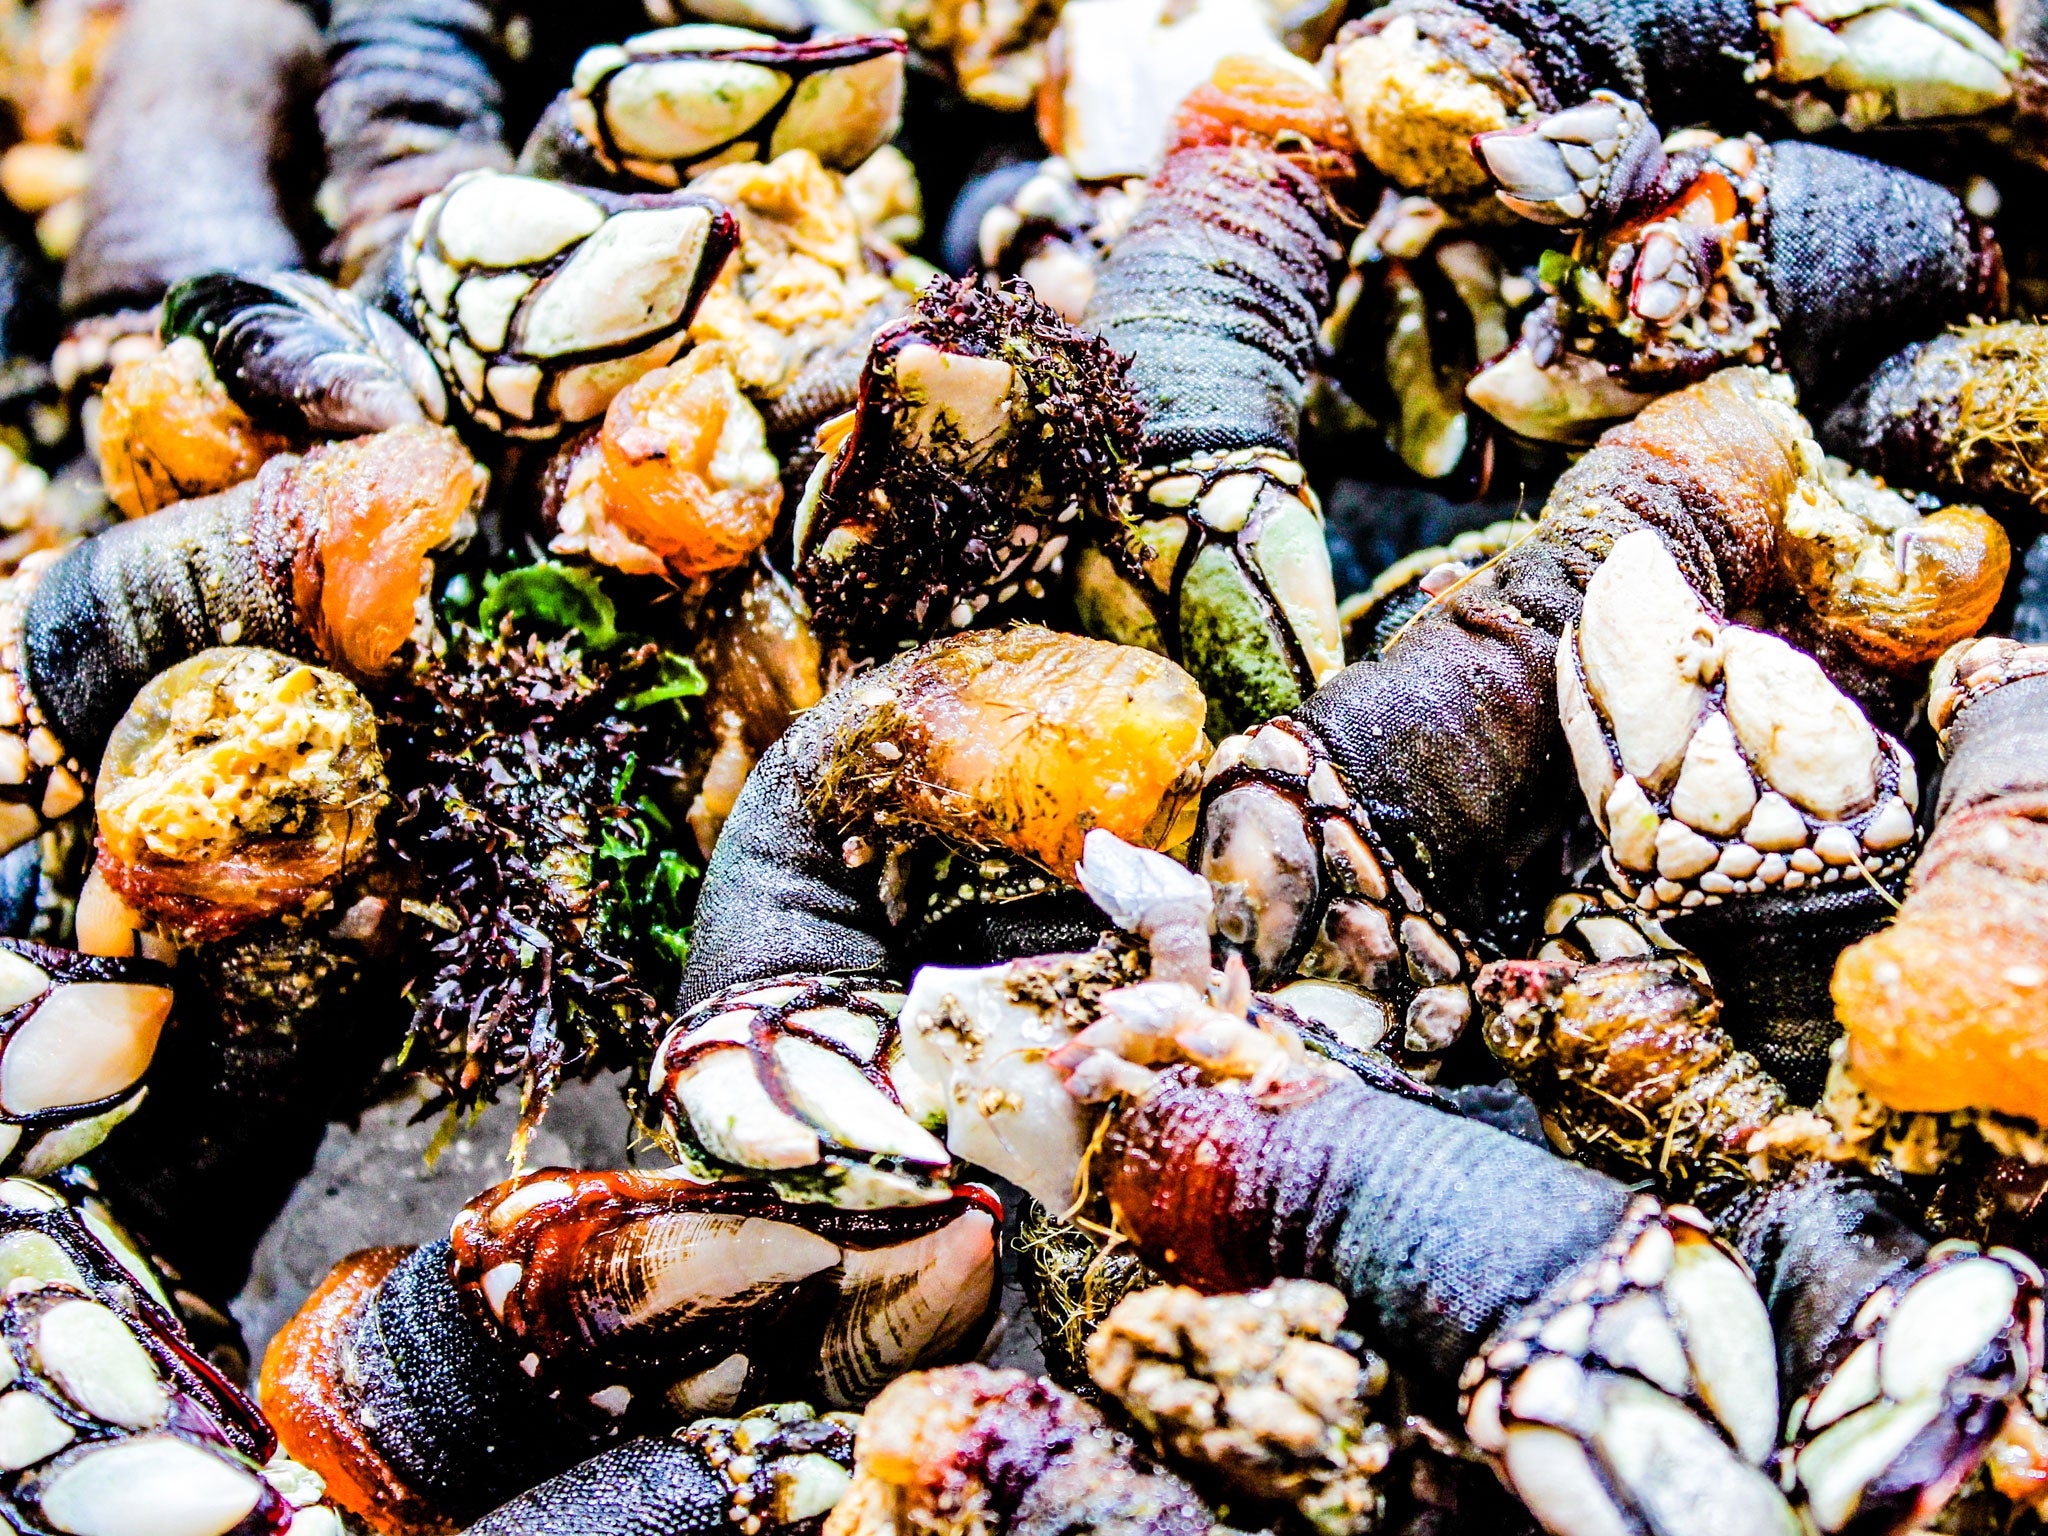 Gooseneck barnacles cling to craggy rocks in violent waters off the coasts of Spain and Portugal